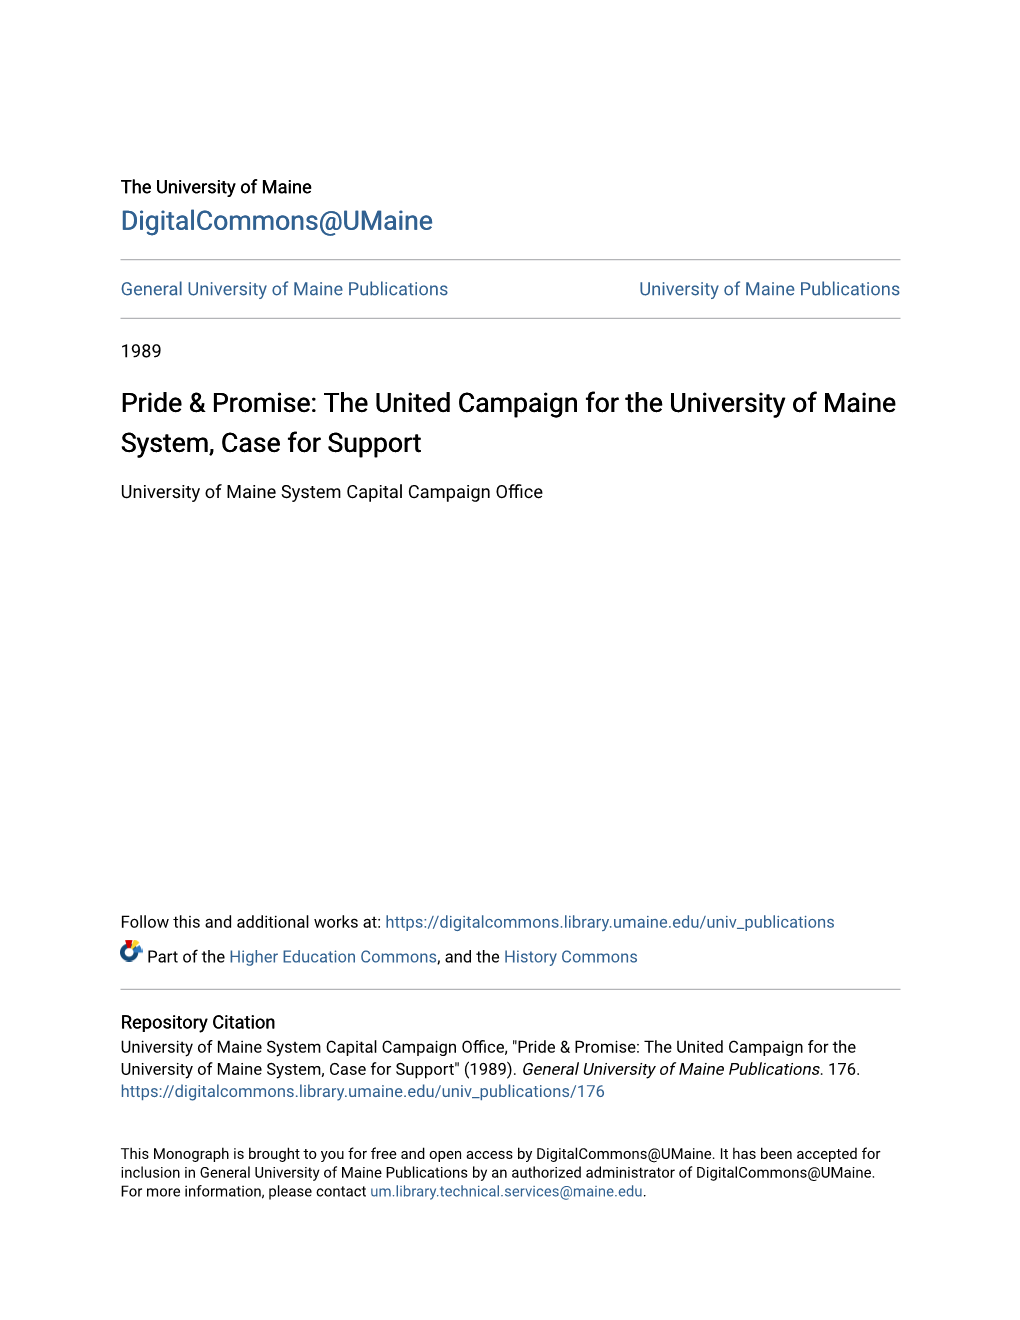 Pride & Promise: the United Campaign for the University of Maine System, Case for Support